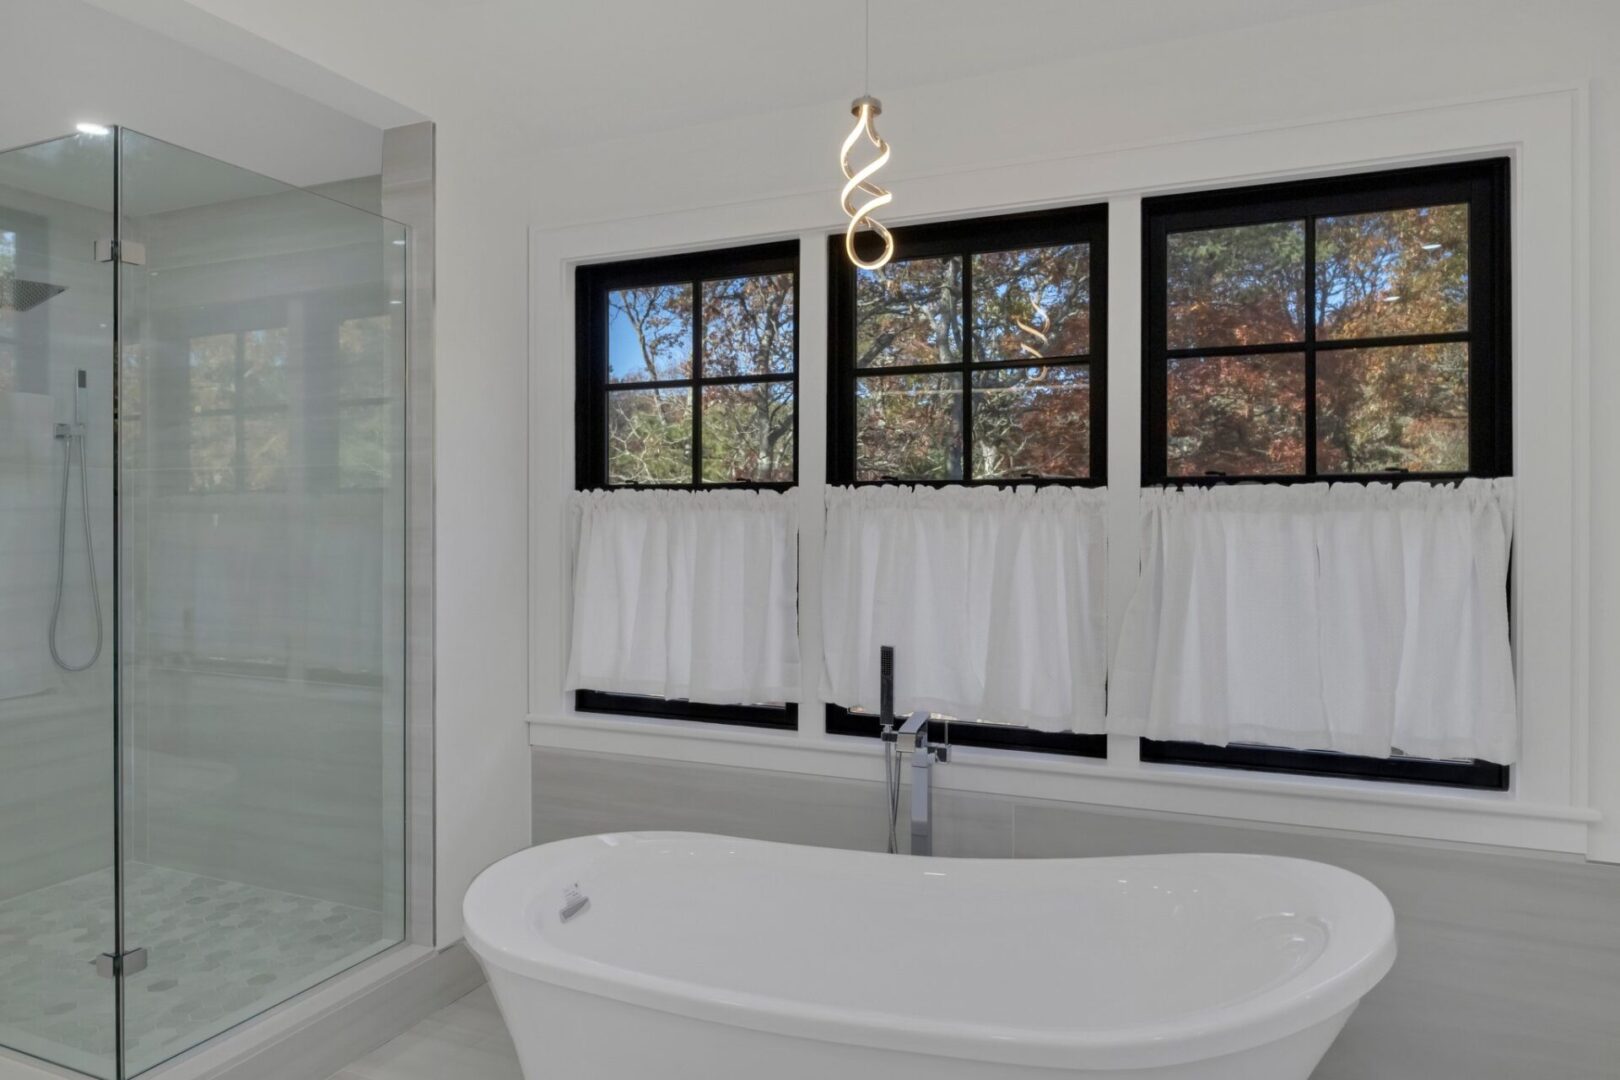 A bathroom with a tub, shower and window.